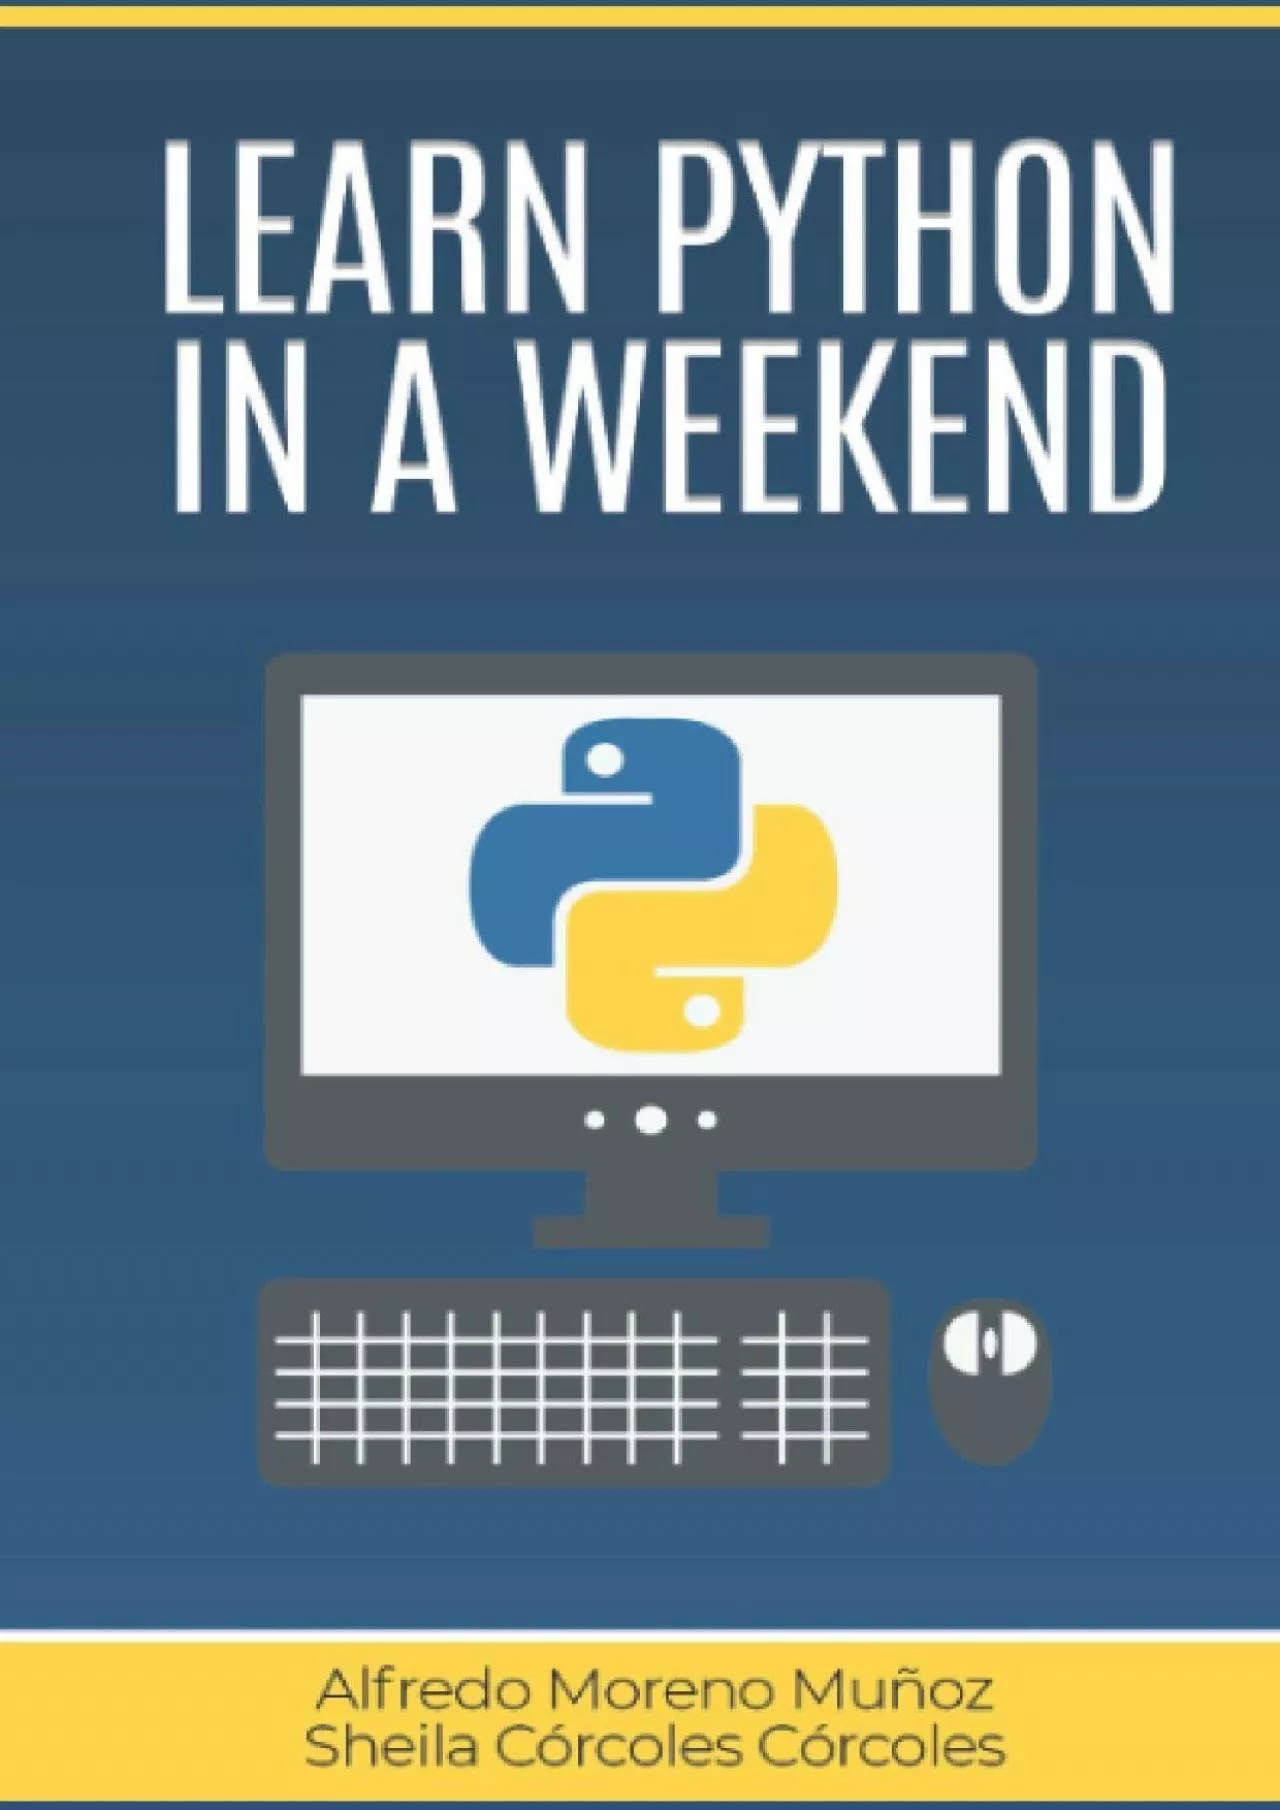 [eBOOK]-Learn Python in a weekend